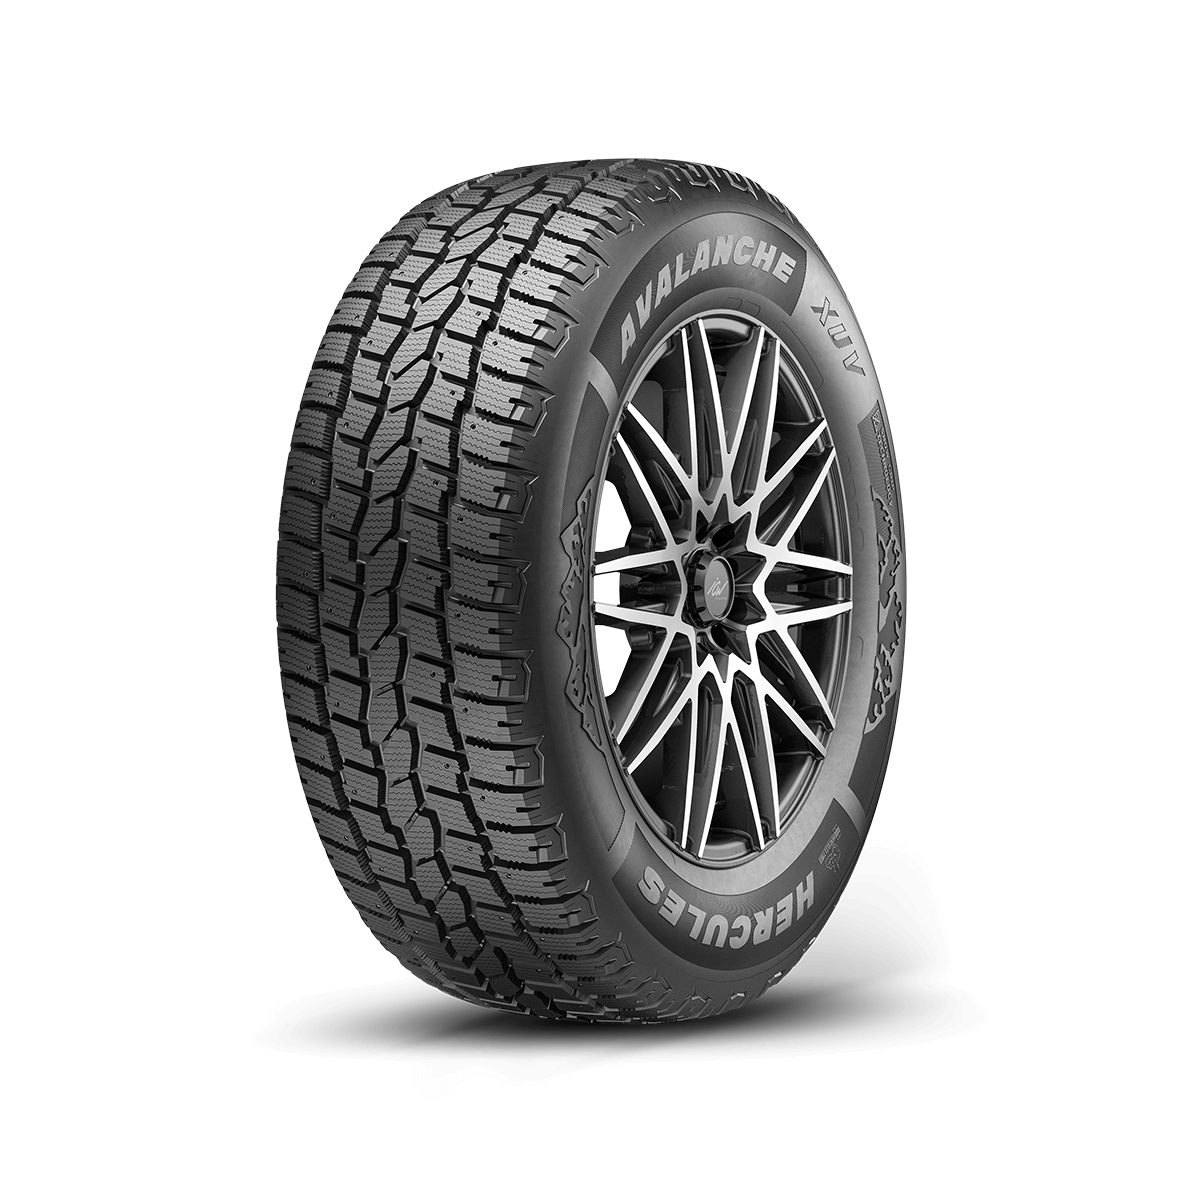 Left side tread and rim view of the Avalanche XUV tire on a white background.